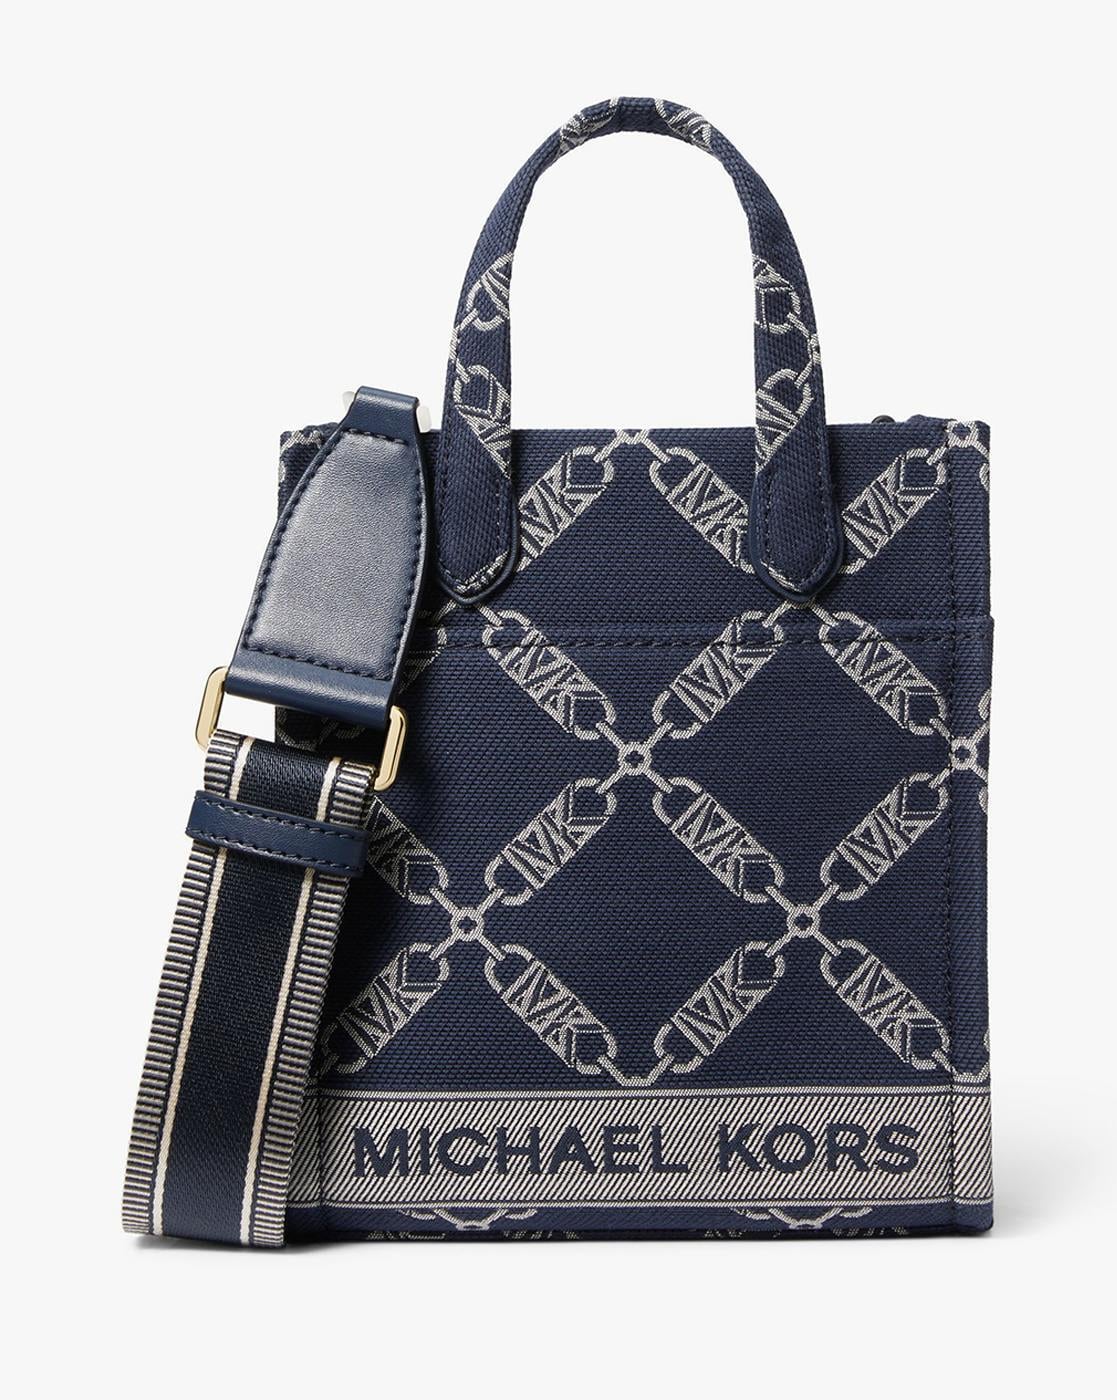 Michael Kors JST Extra-Small Saffiano Leather TZ Tote Bag in Navy